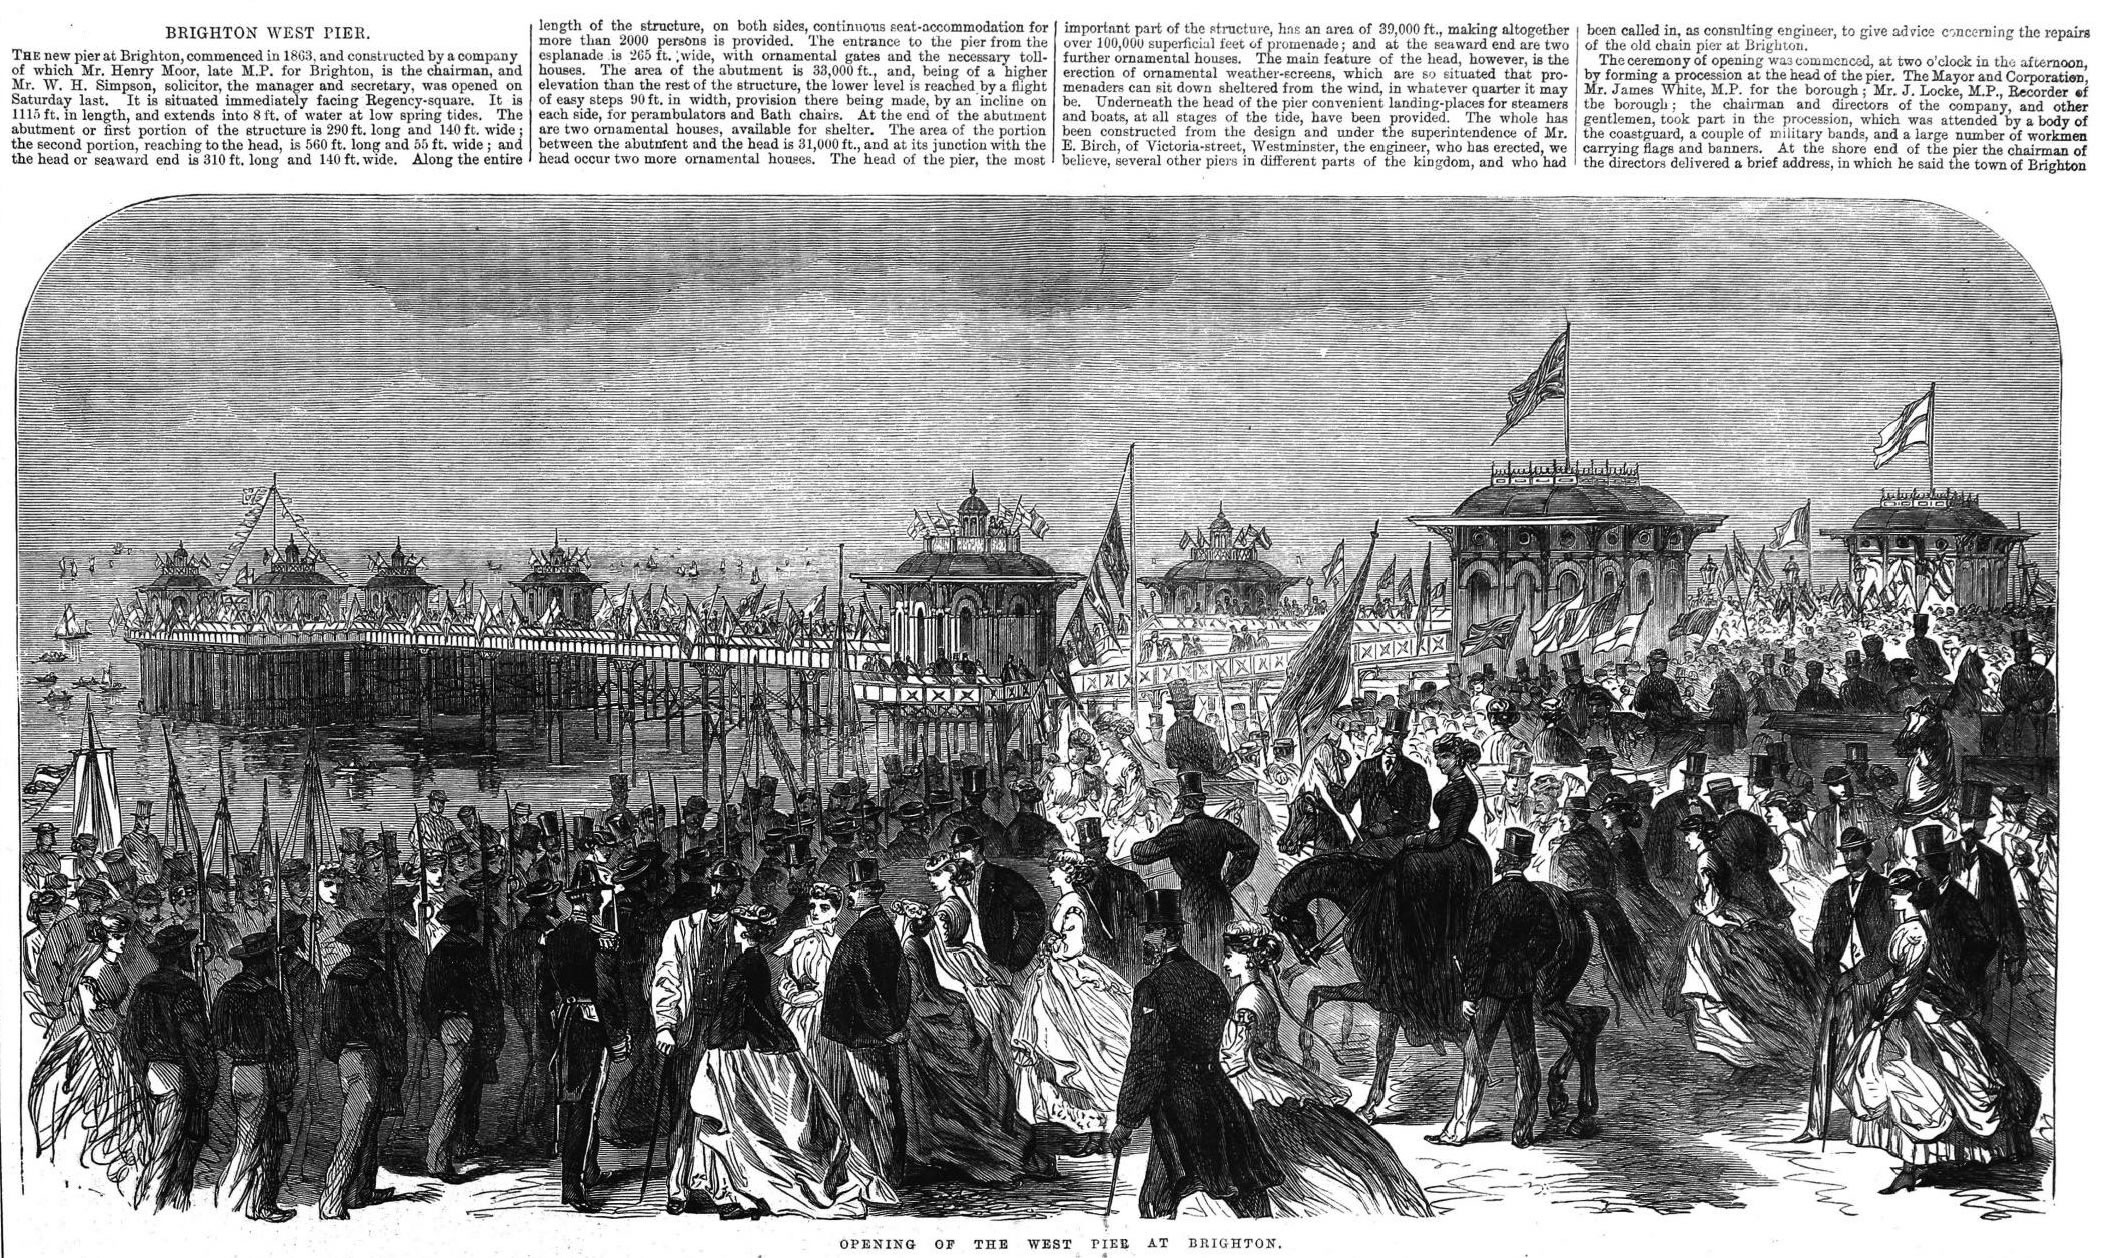 This Illustrated London News article, at The Genealogist, depicts the opening of Brighton's West Pier in
				1866,
				from the same spot where we see Richard Osman pictured above.